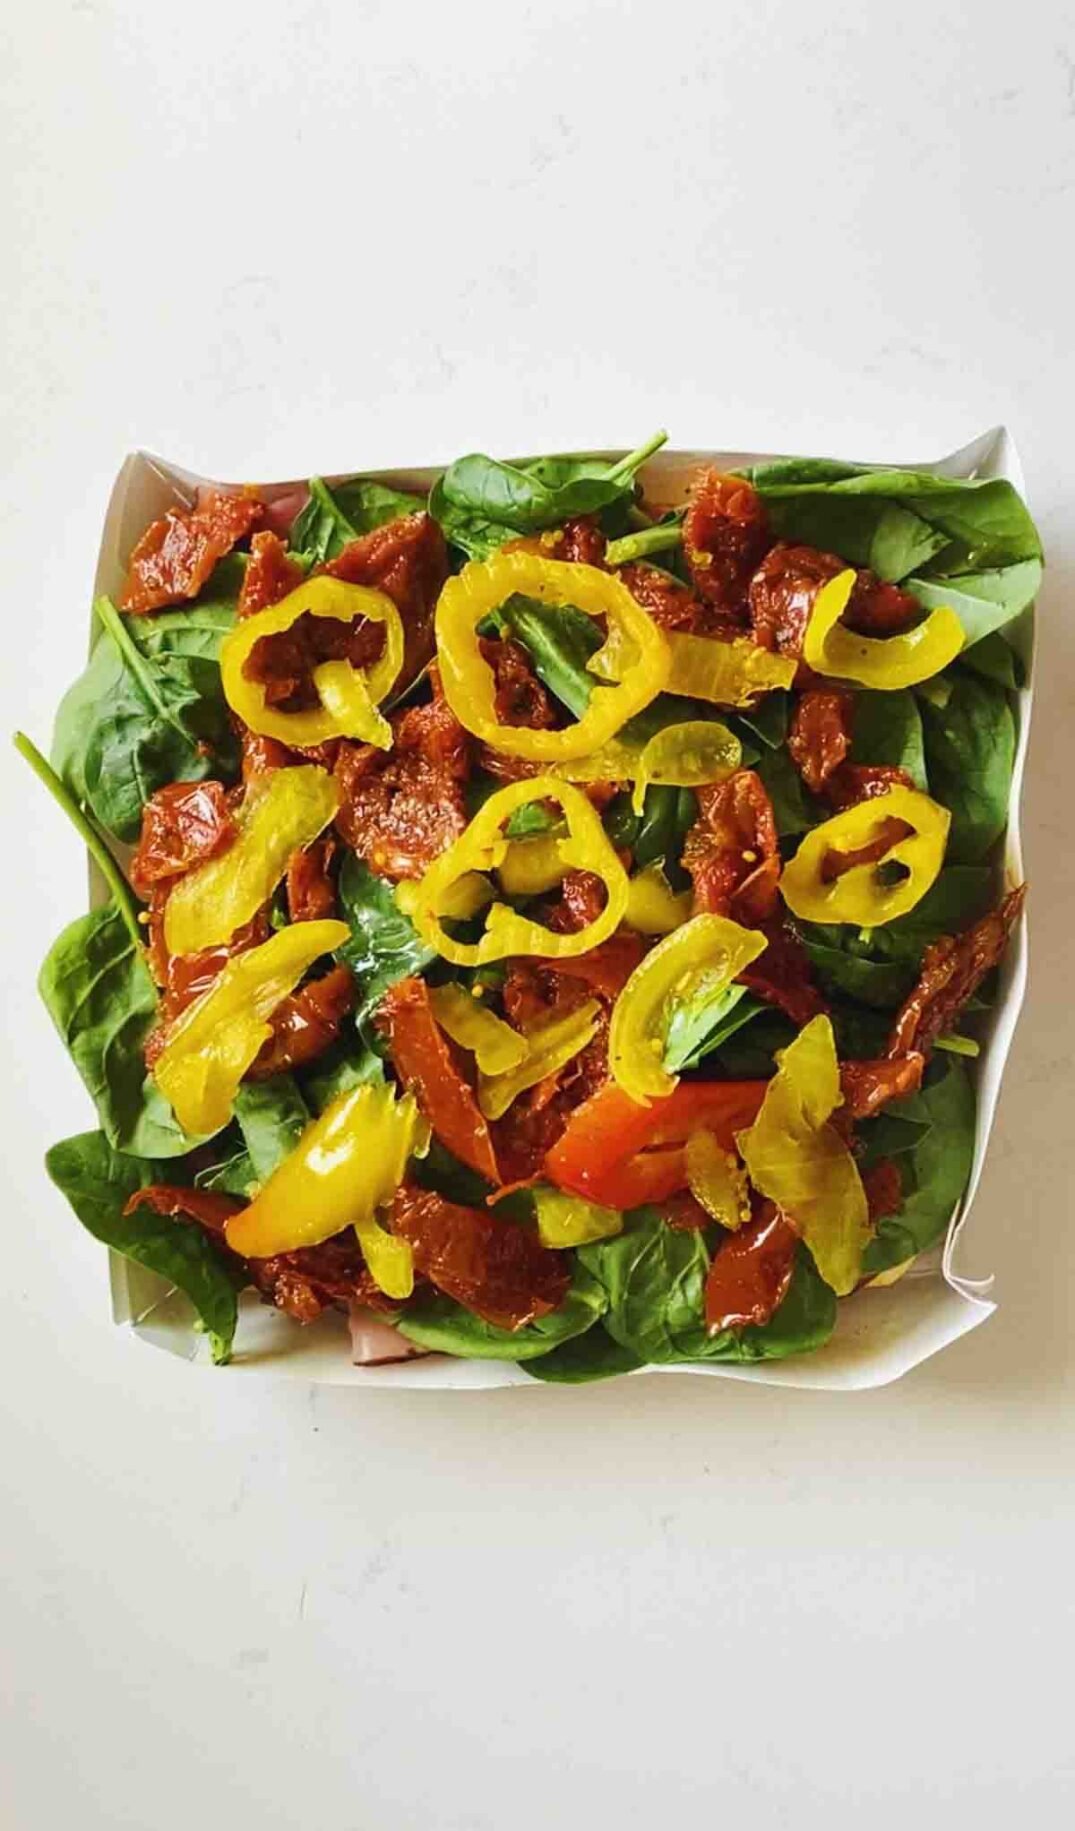 antipasto ingredients like yellow banana peppers, sun dried tomatoes and green spinach on top of slider buns. .